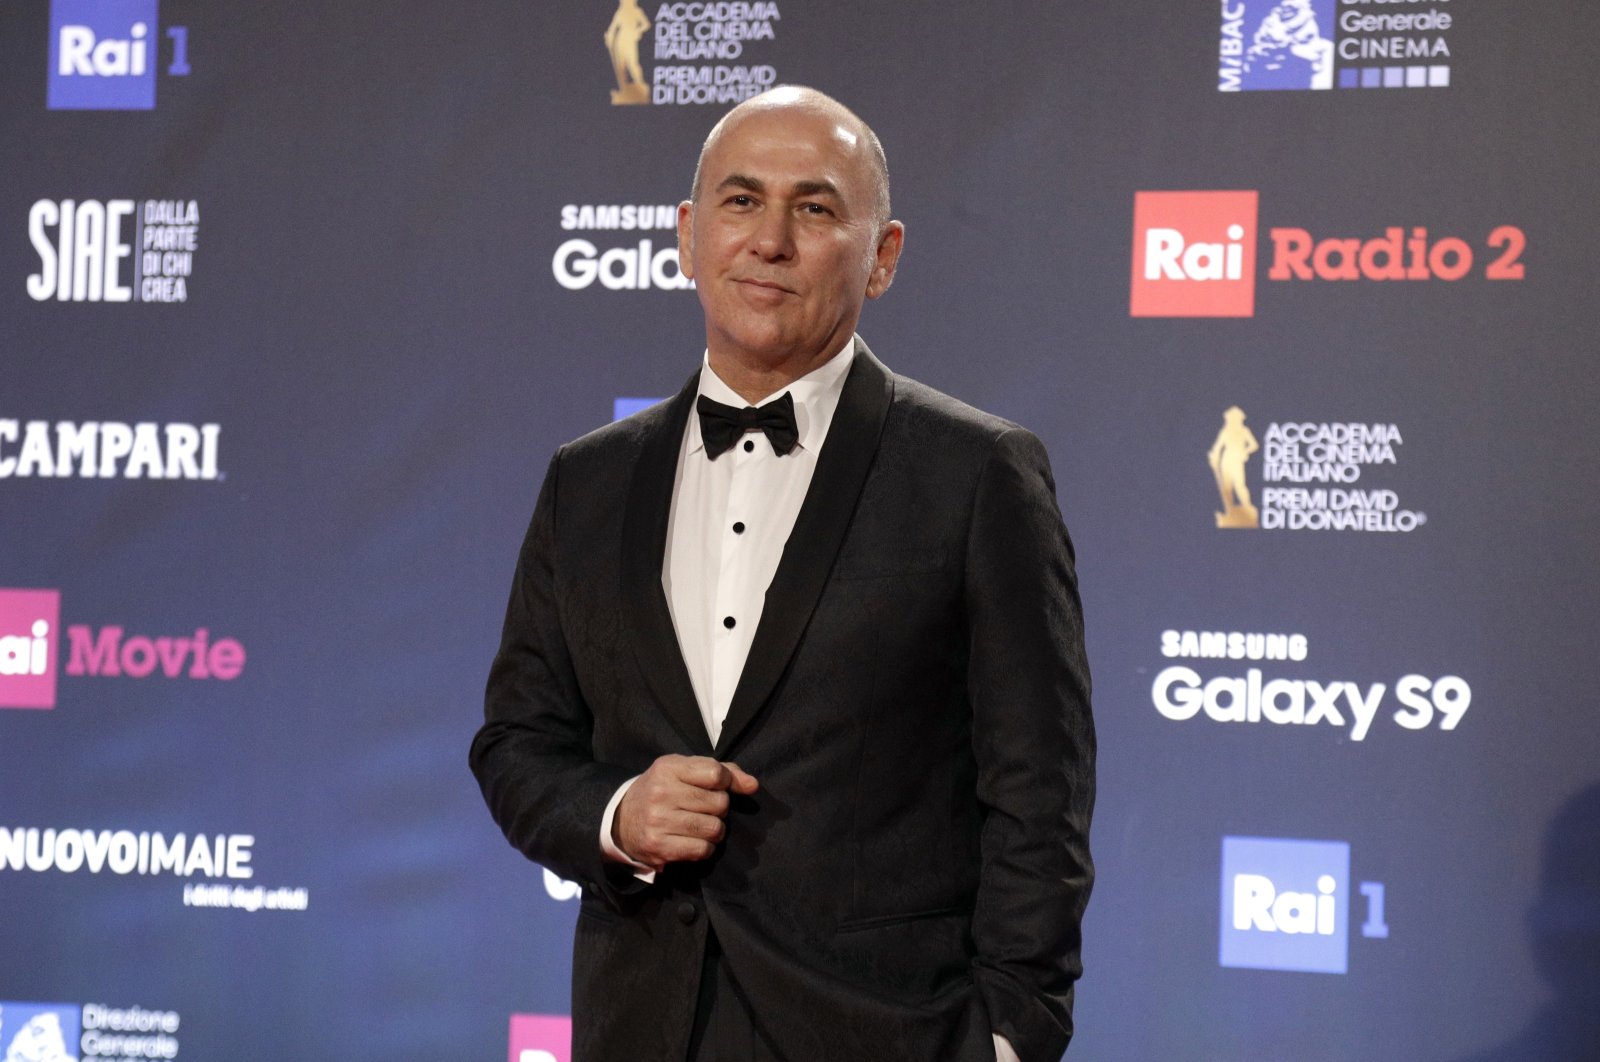 Turkish director Ferzan Özpetek walks the red carpet as he arrives to attend the David Donatello awards ceremony in Rome, March 21, 2018. (AP Photo)